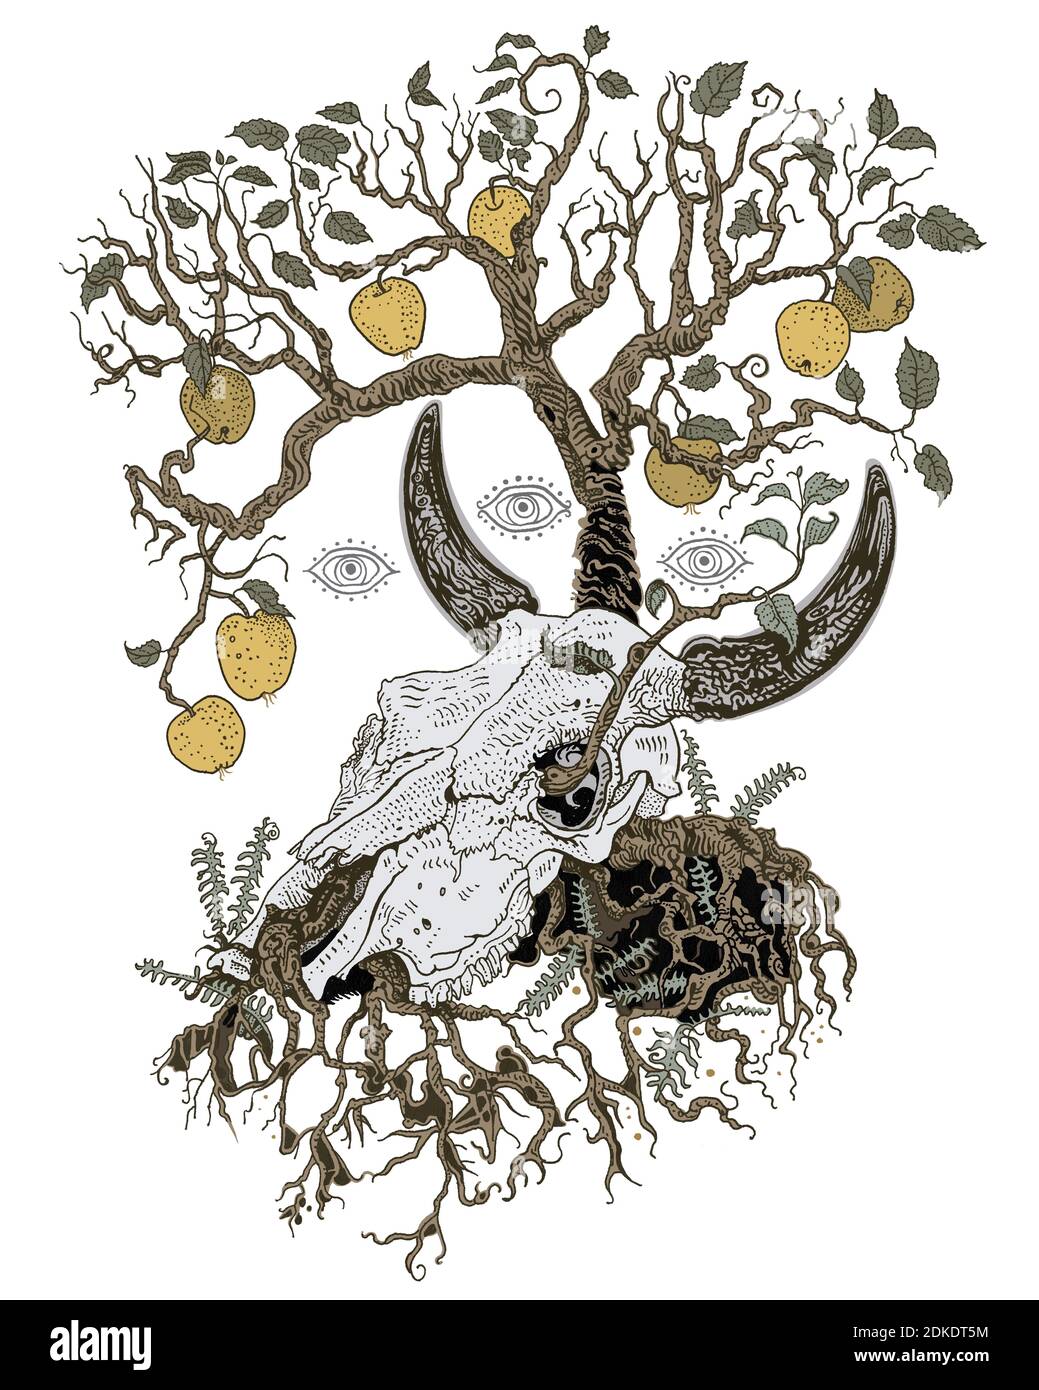 Apple tree grows out of a cow skull. Symbol of circle of life, death and rebirth. Folktale, mythology, bull, ox bones. T shirt print, tattoo design, r Stock Photo